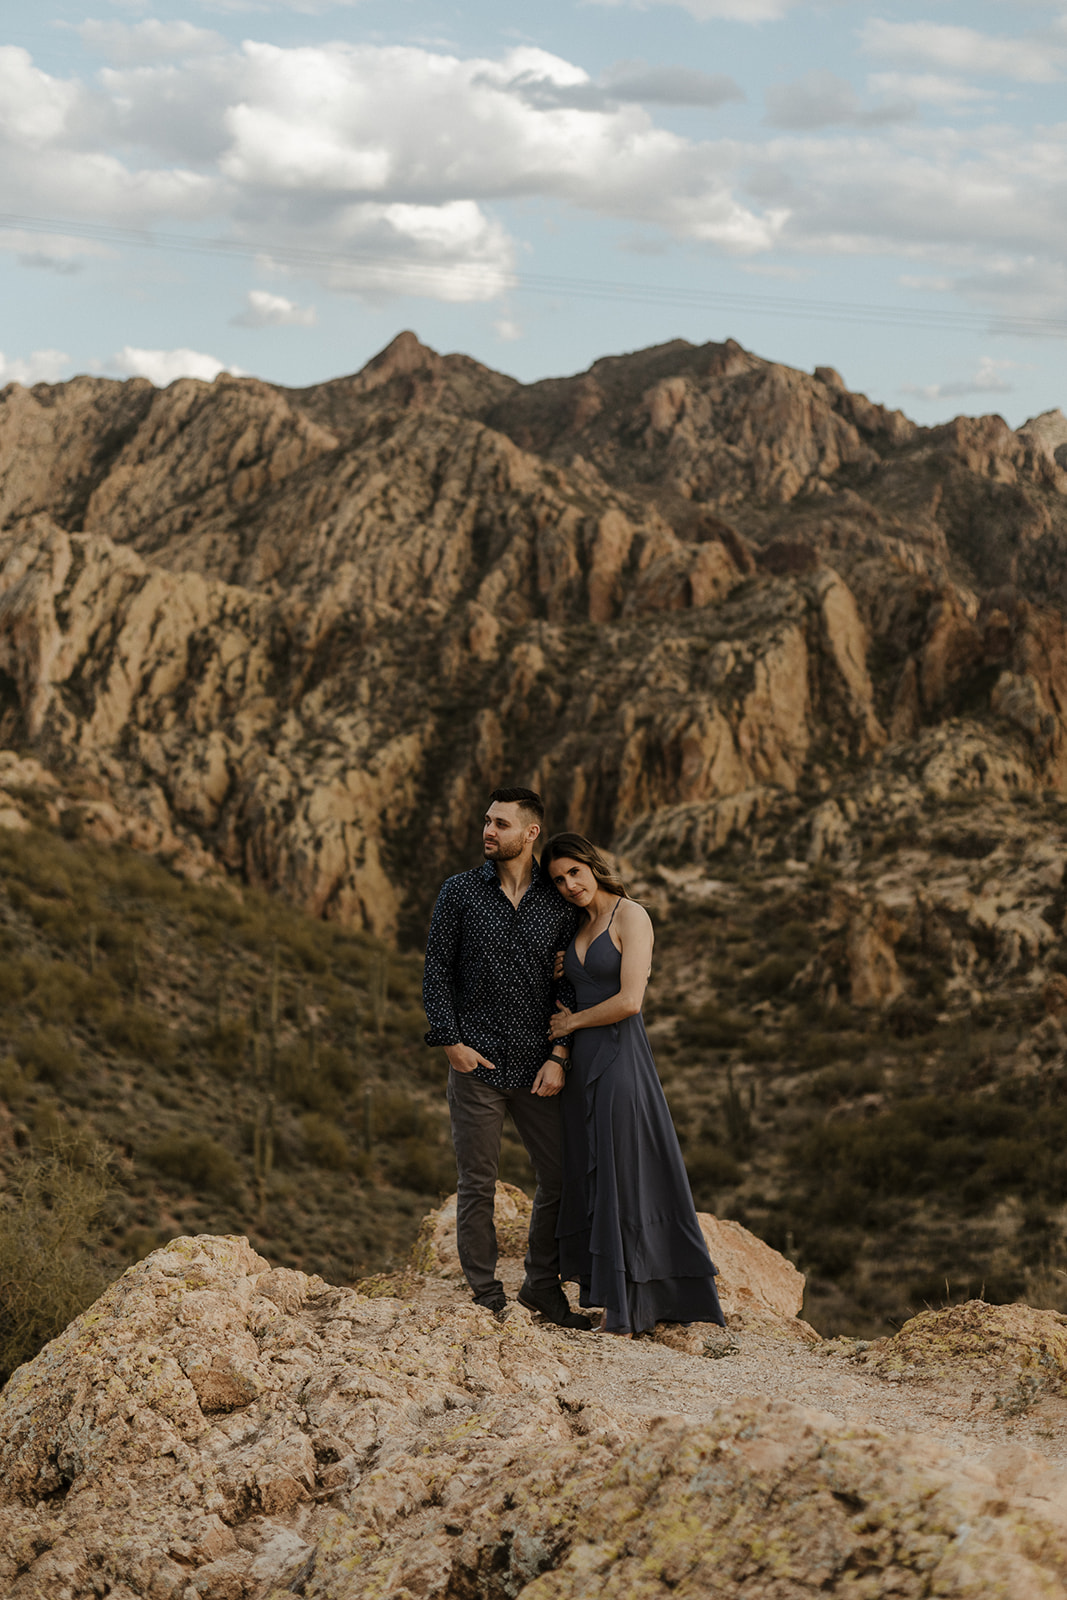 newly engaged couple holding each other arms in the mountains during engagement photos